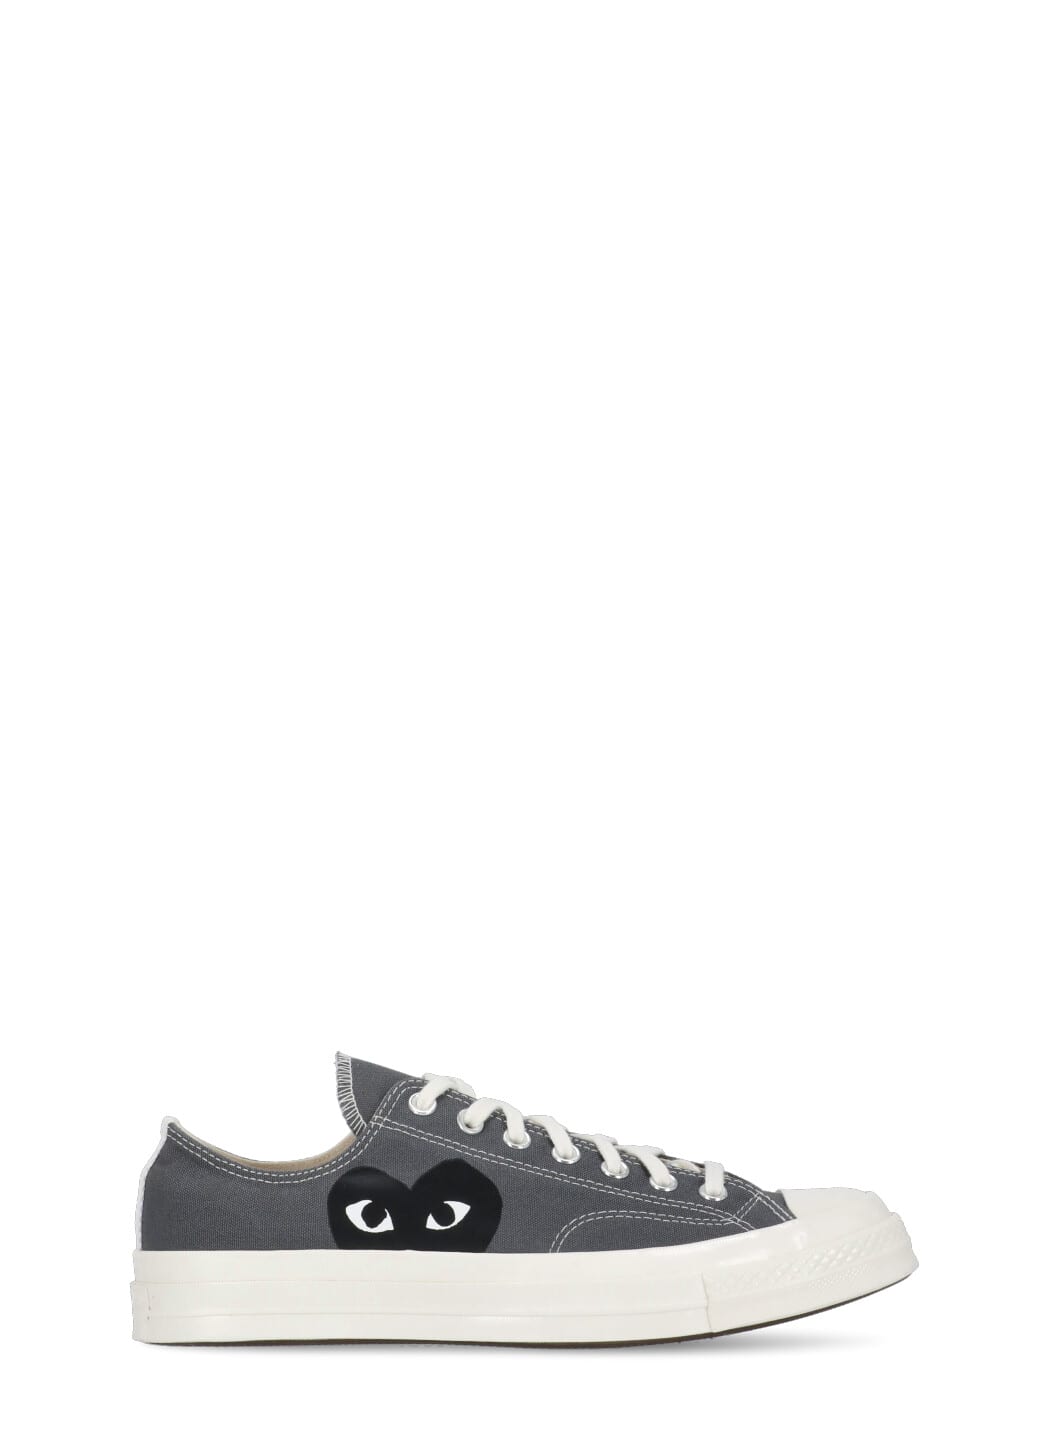 Comme Des Garçons Play Chuck Taylor Sneakers In Grey